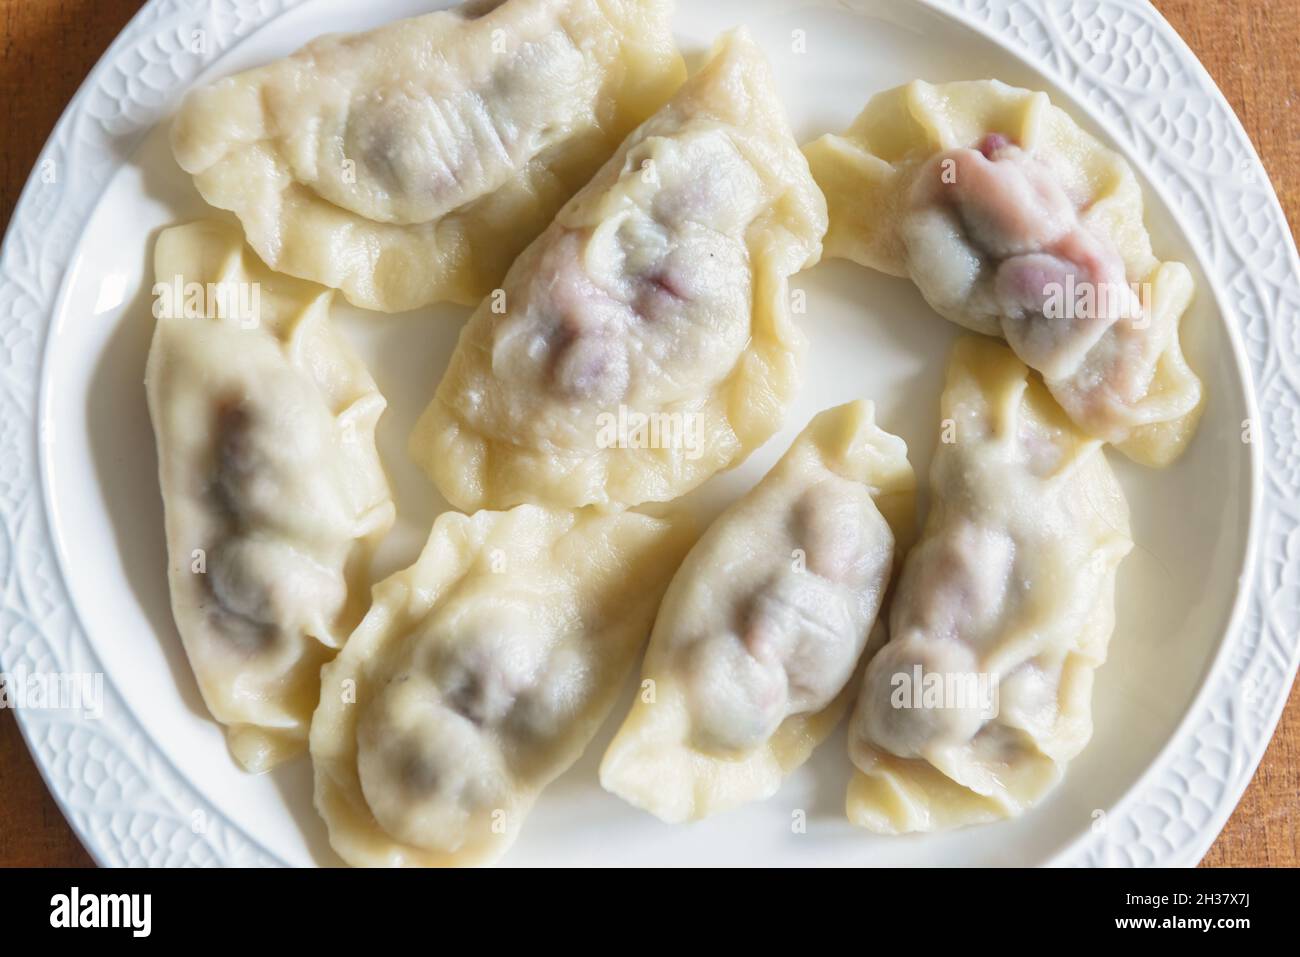 Fresh dumplings with cherry filling on a plate Stock Photo